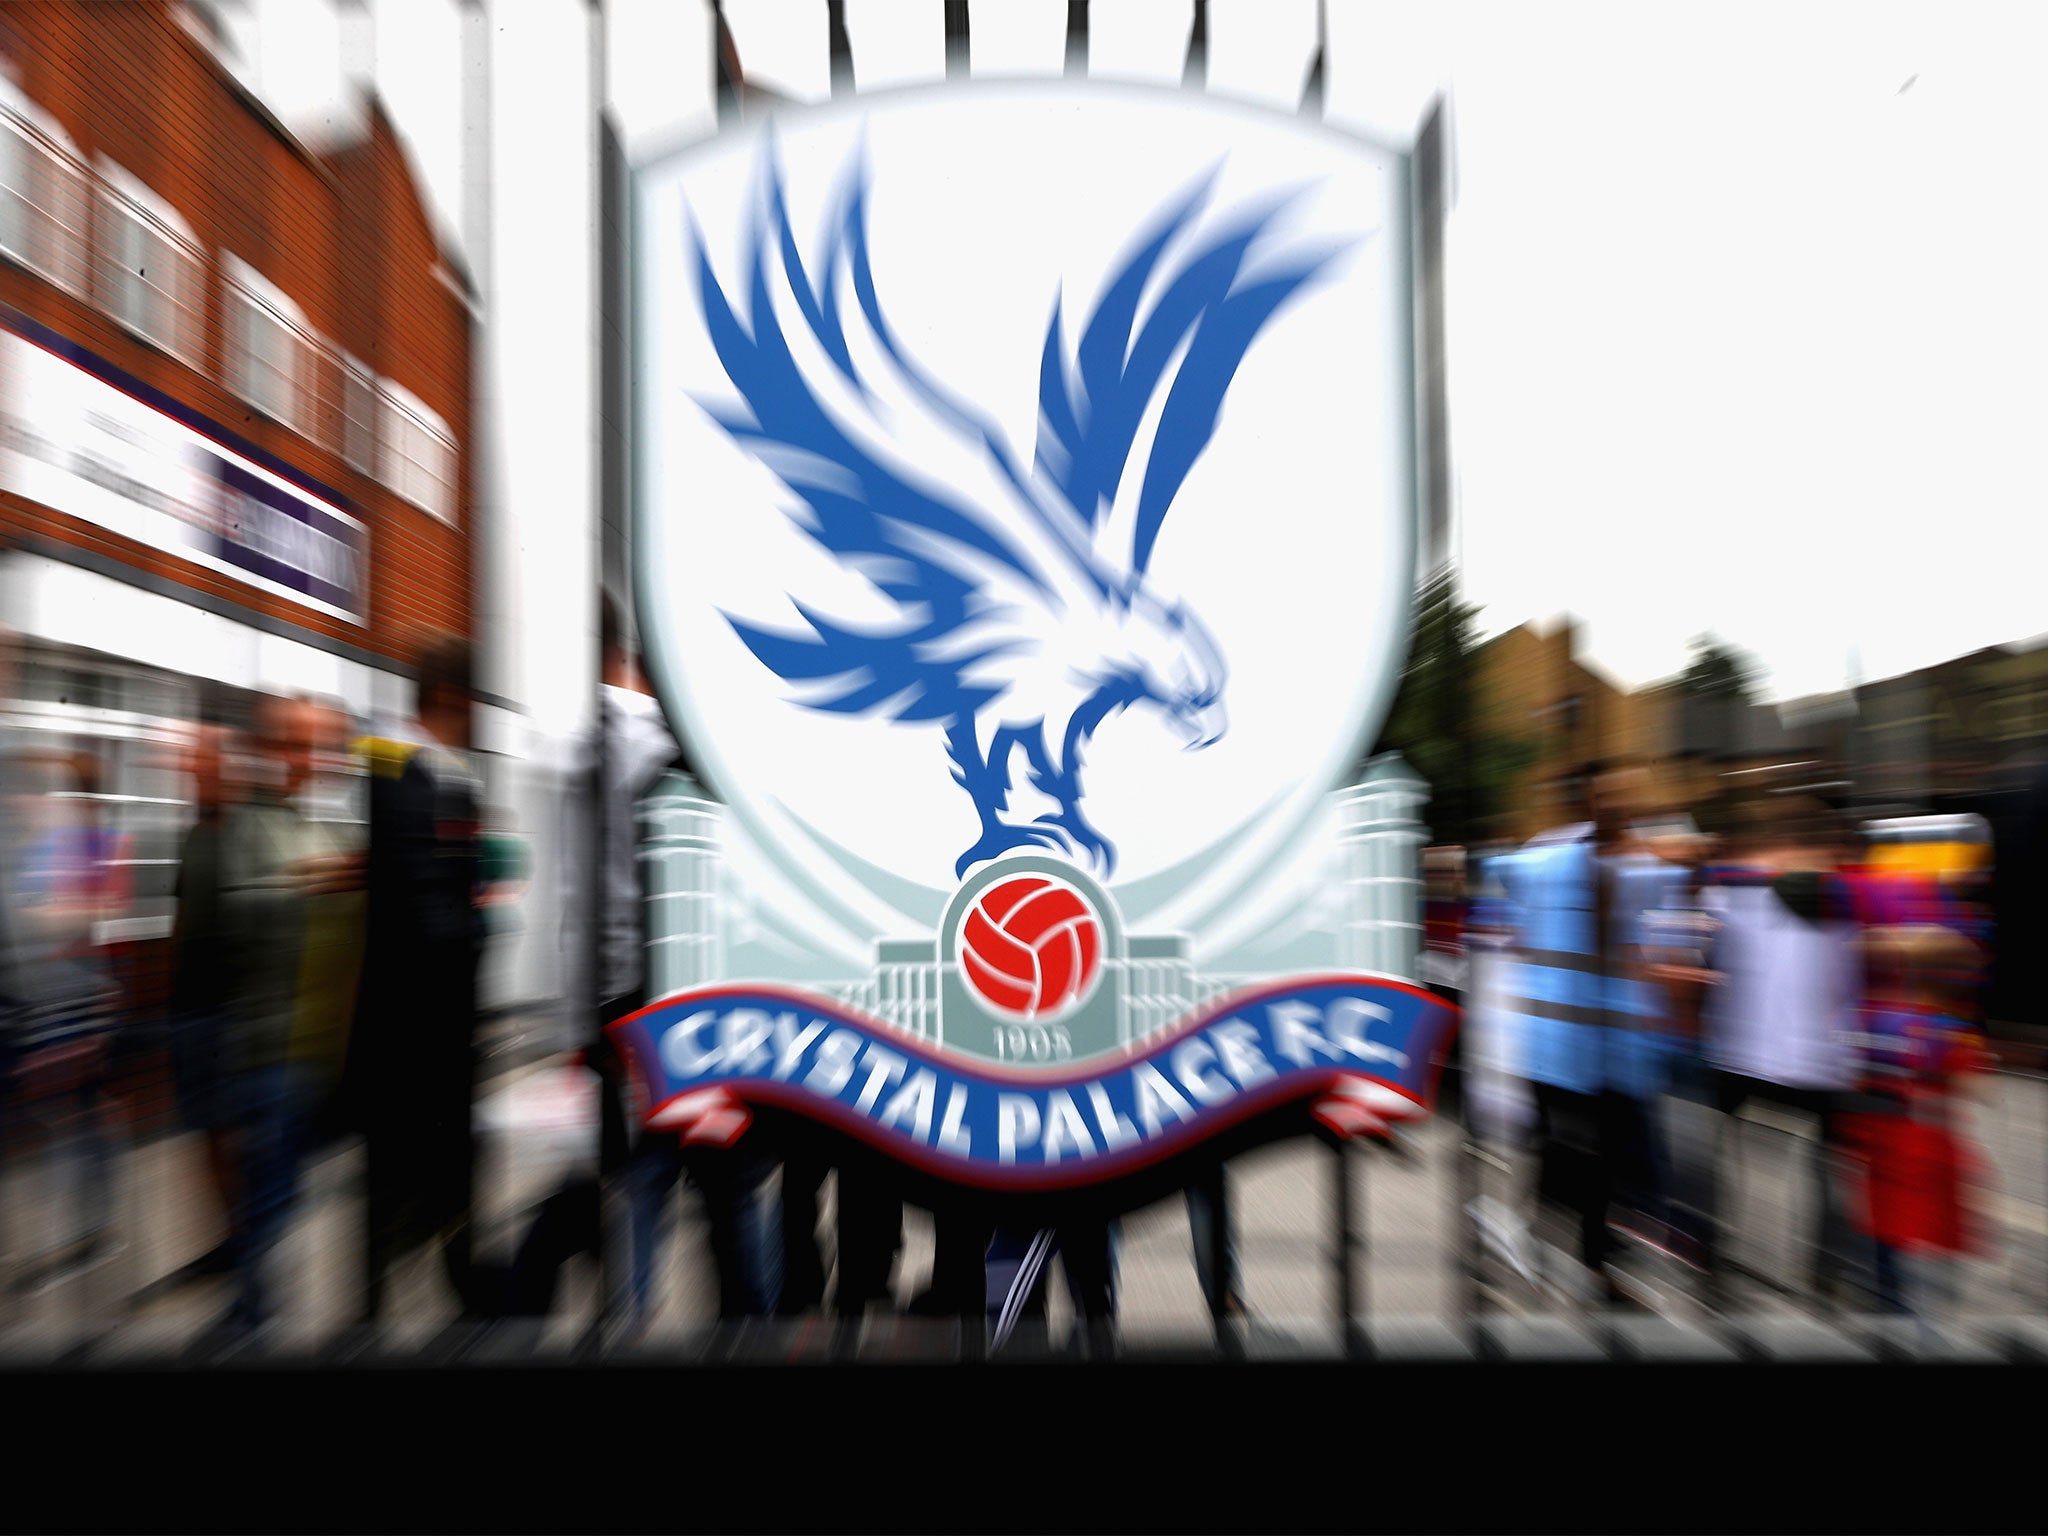 Crystal Palace are hoping to have a new manager in place soon